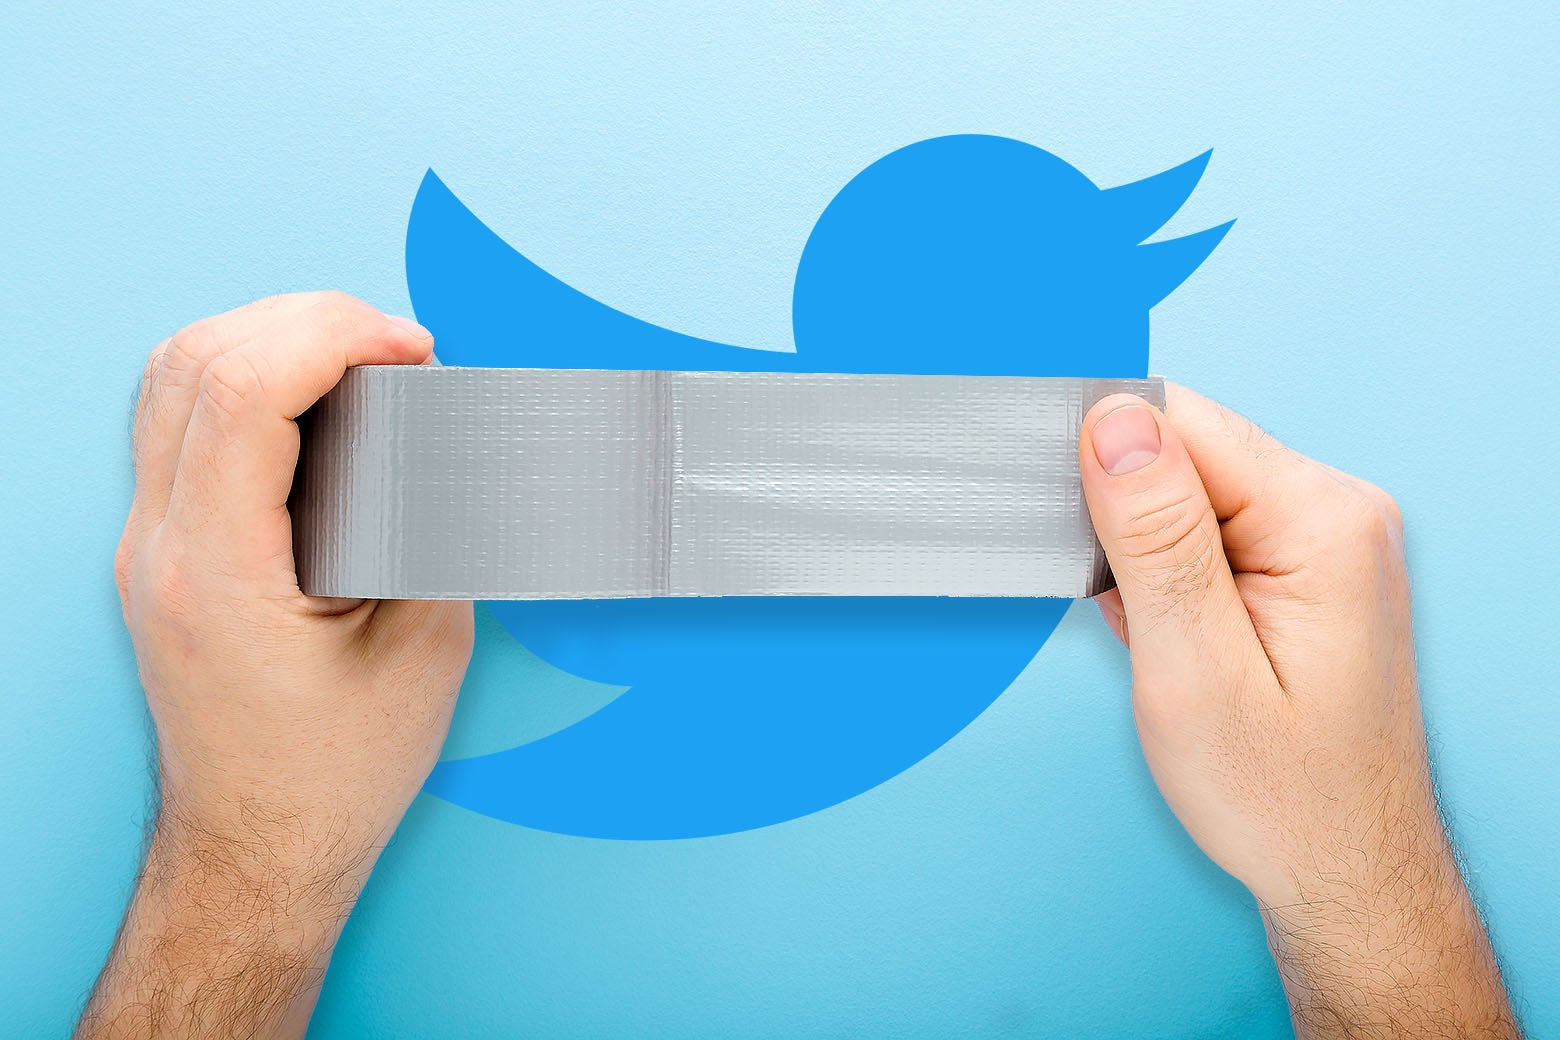 Hands pulling a roll of duct tape over the Twitter bird logo